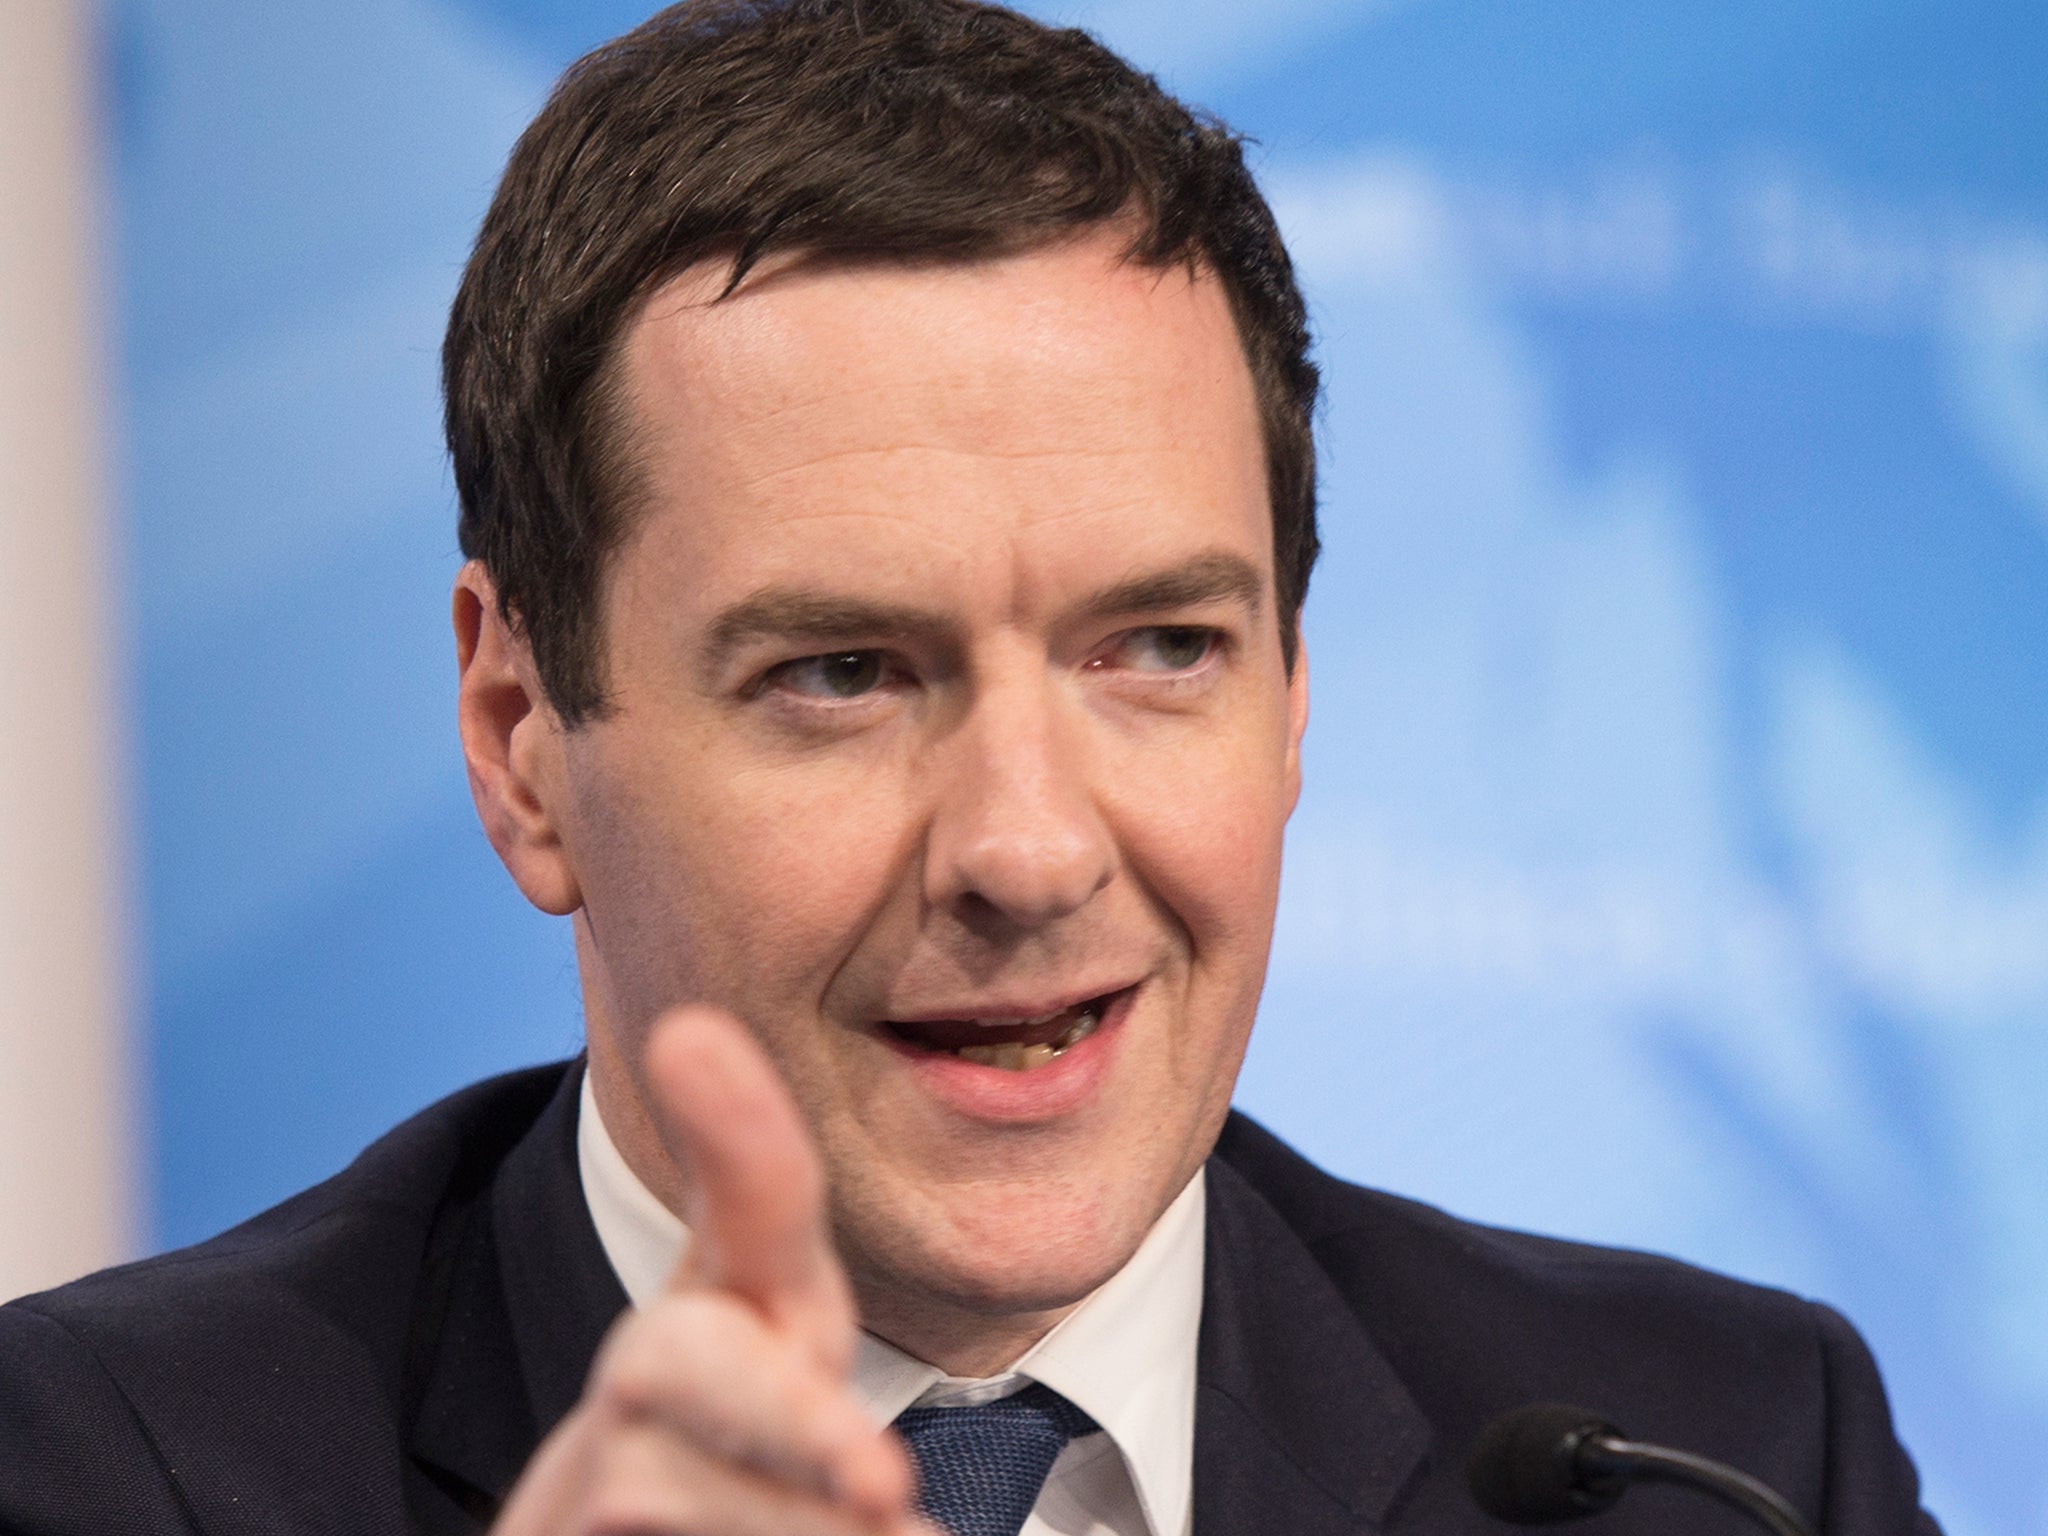 George Osborne urged closer economic ties with the US in an article in the Wall Street Journal